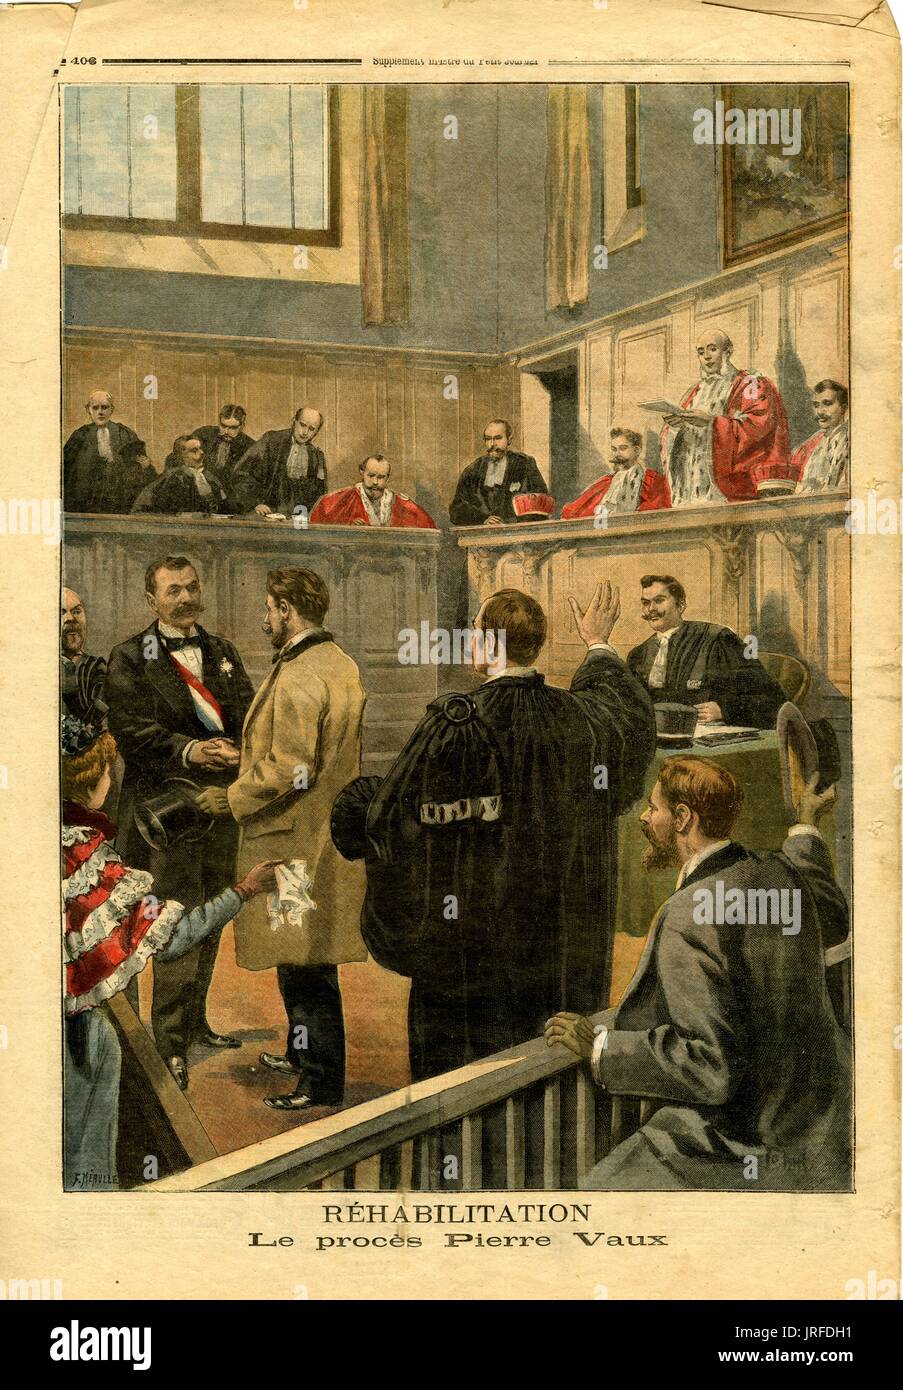 Petit Journal back cover, titled 'Rehabilitation, Le process Pierre Vaux', two men are shaking hands in the middle of a courtroom and everyone else is looking on, 1890. Stock Photo